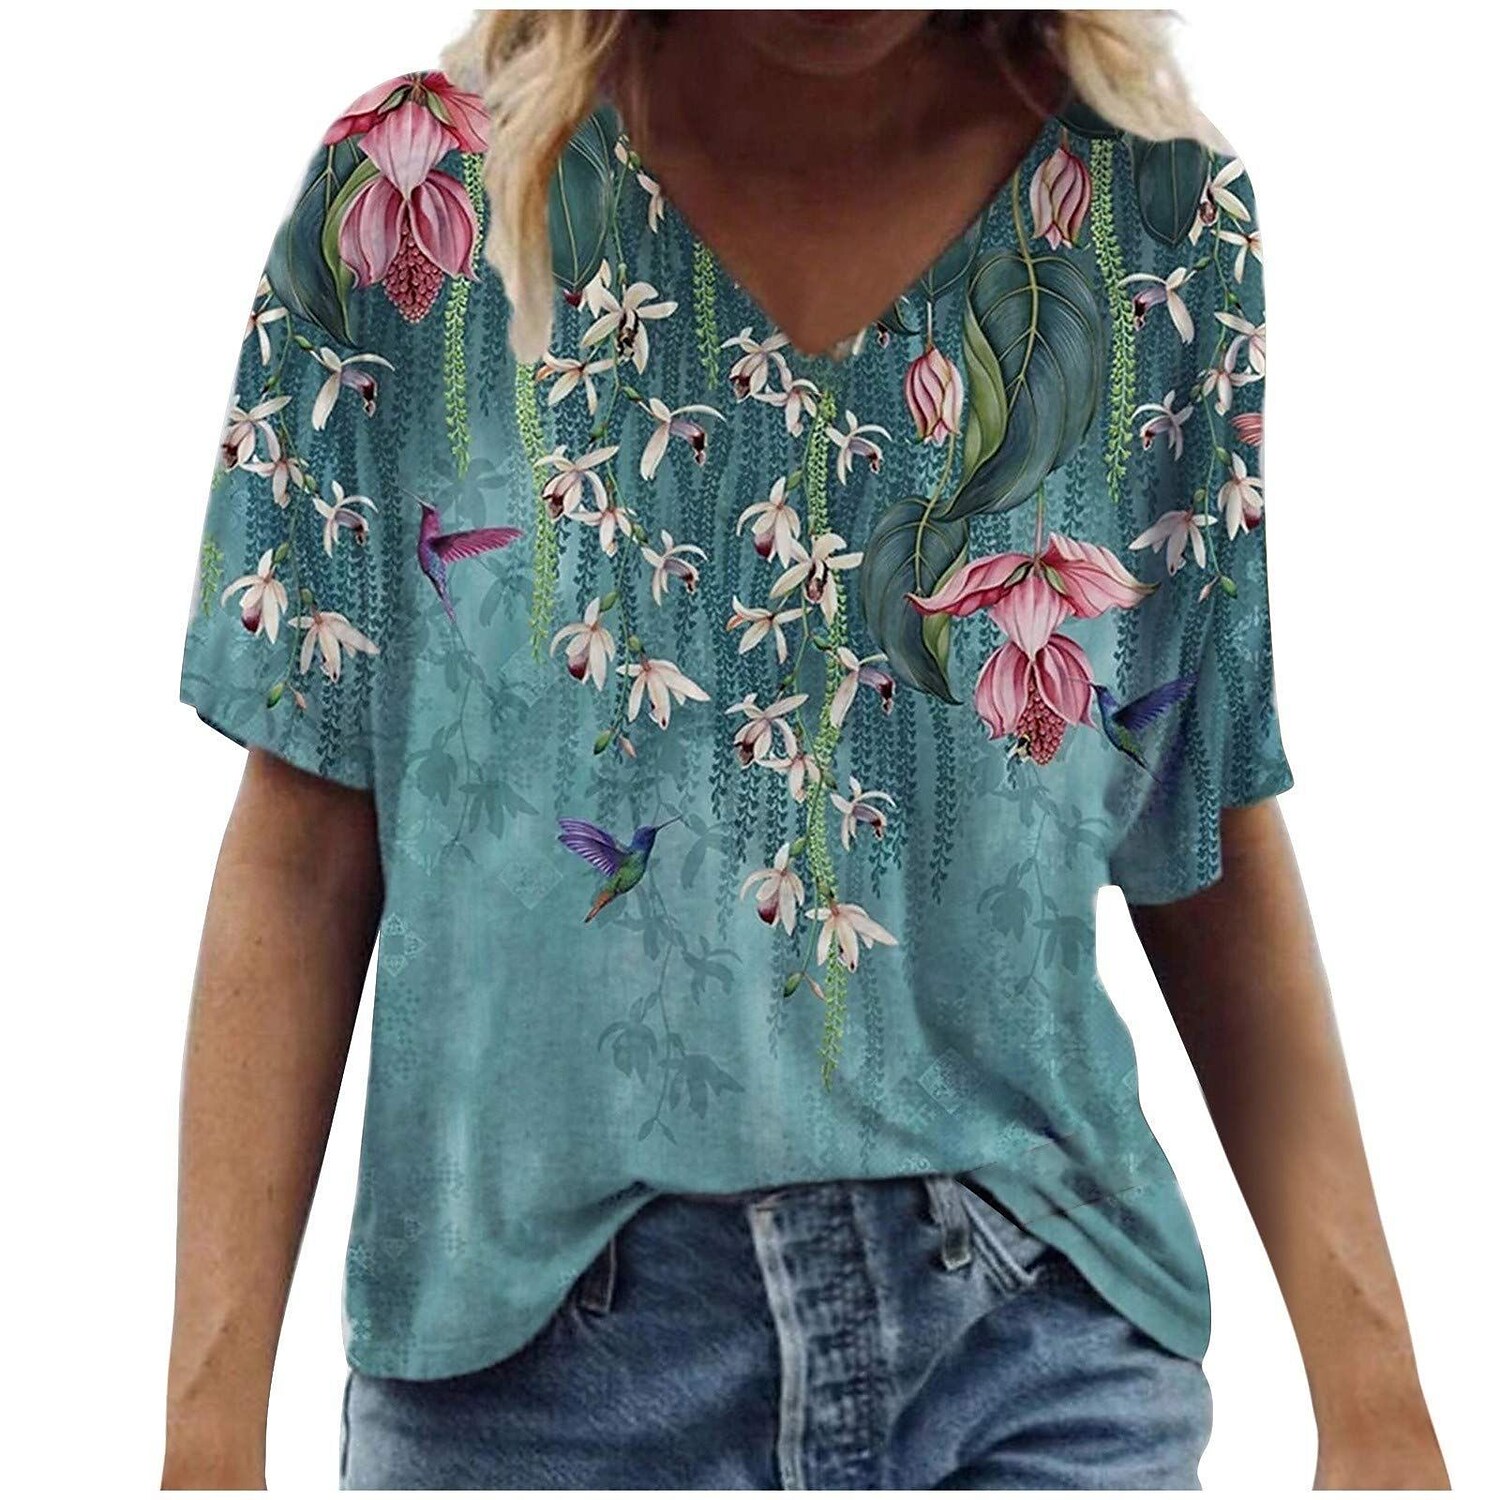 Women's Floral Theme T shirt Graphic Florals V Neck Basic Tops Floral blue Willow Green Blushing Pink